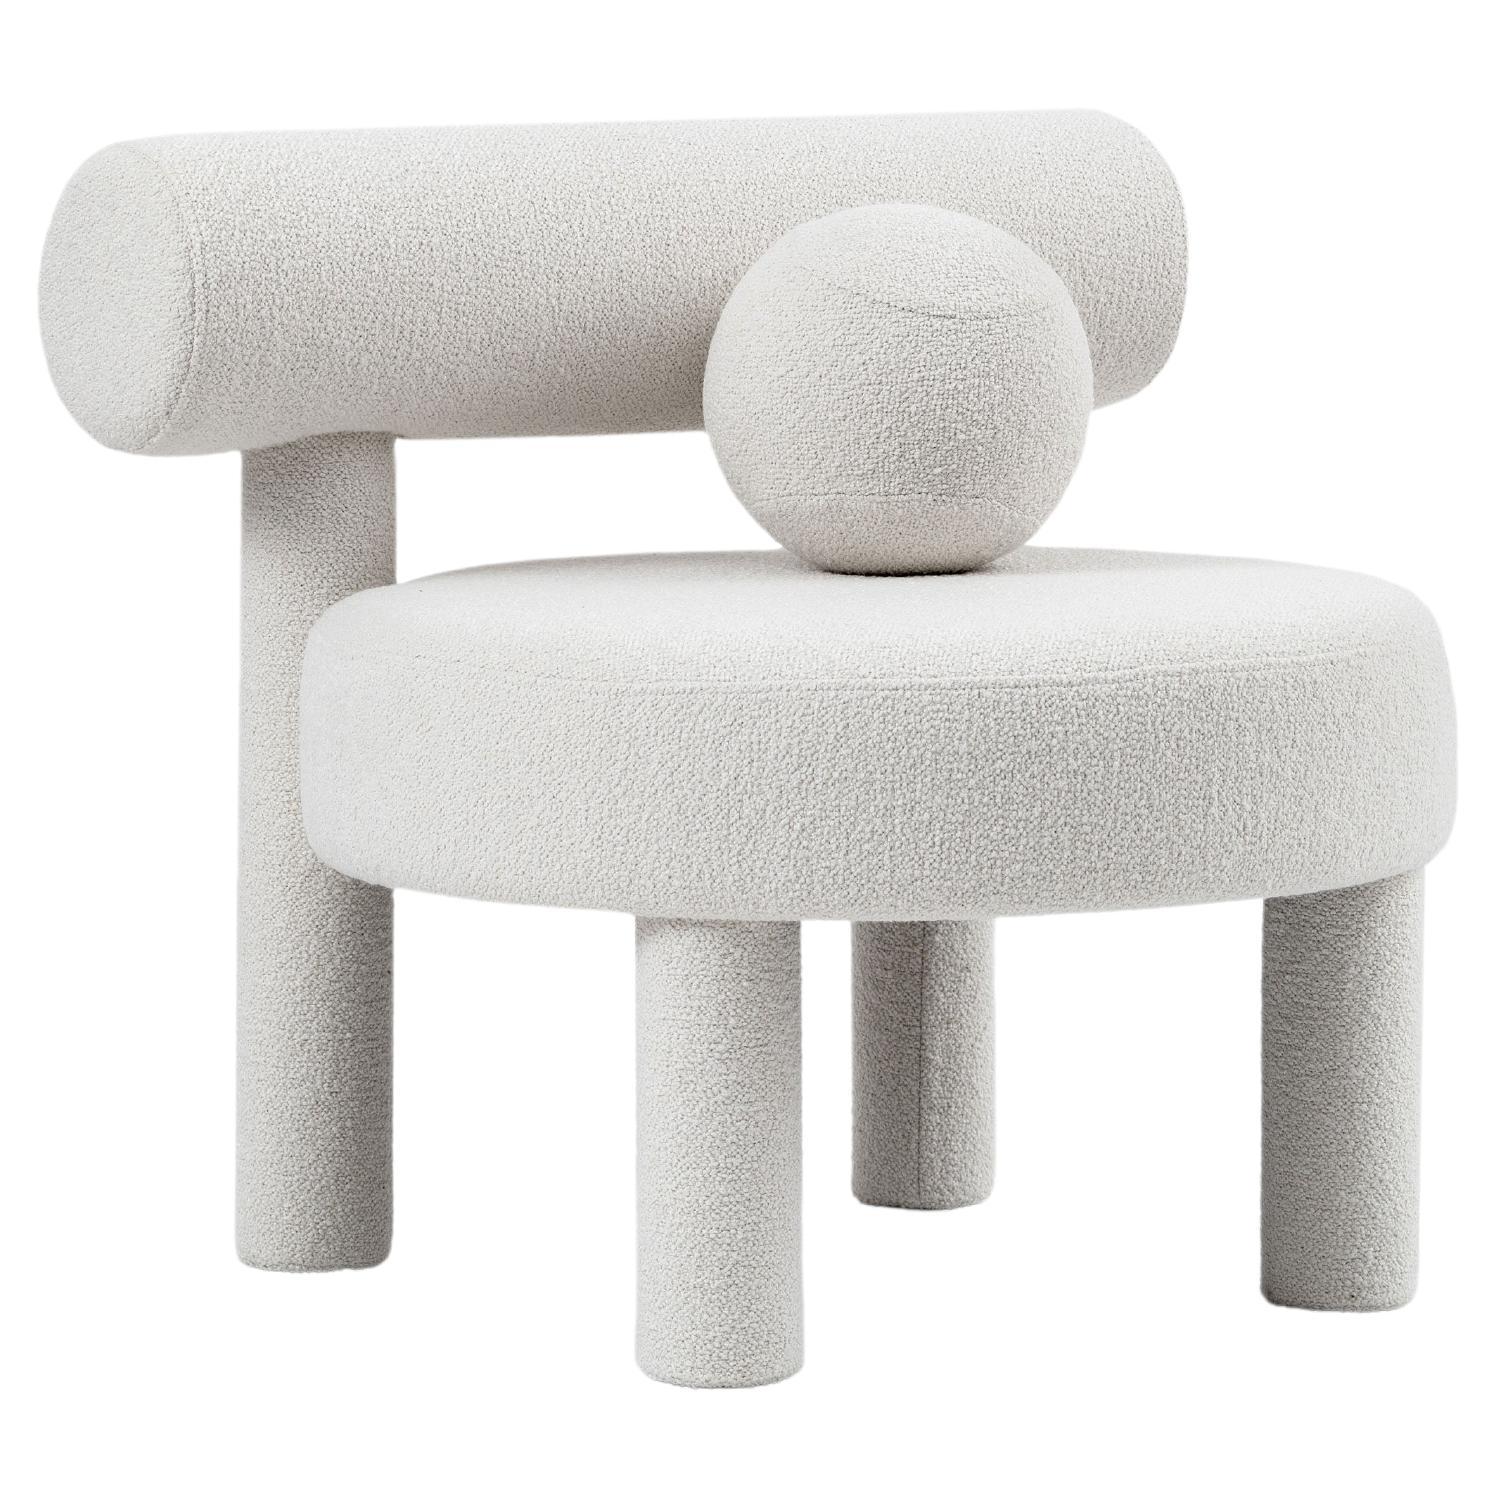 Low Chair 'GROPIUS CS1' by NOOM, Fully upholstered in Bouclé, White